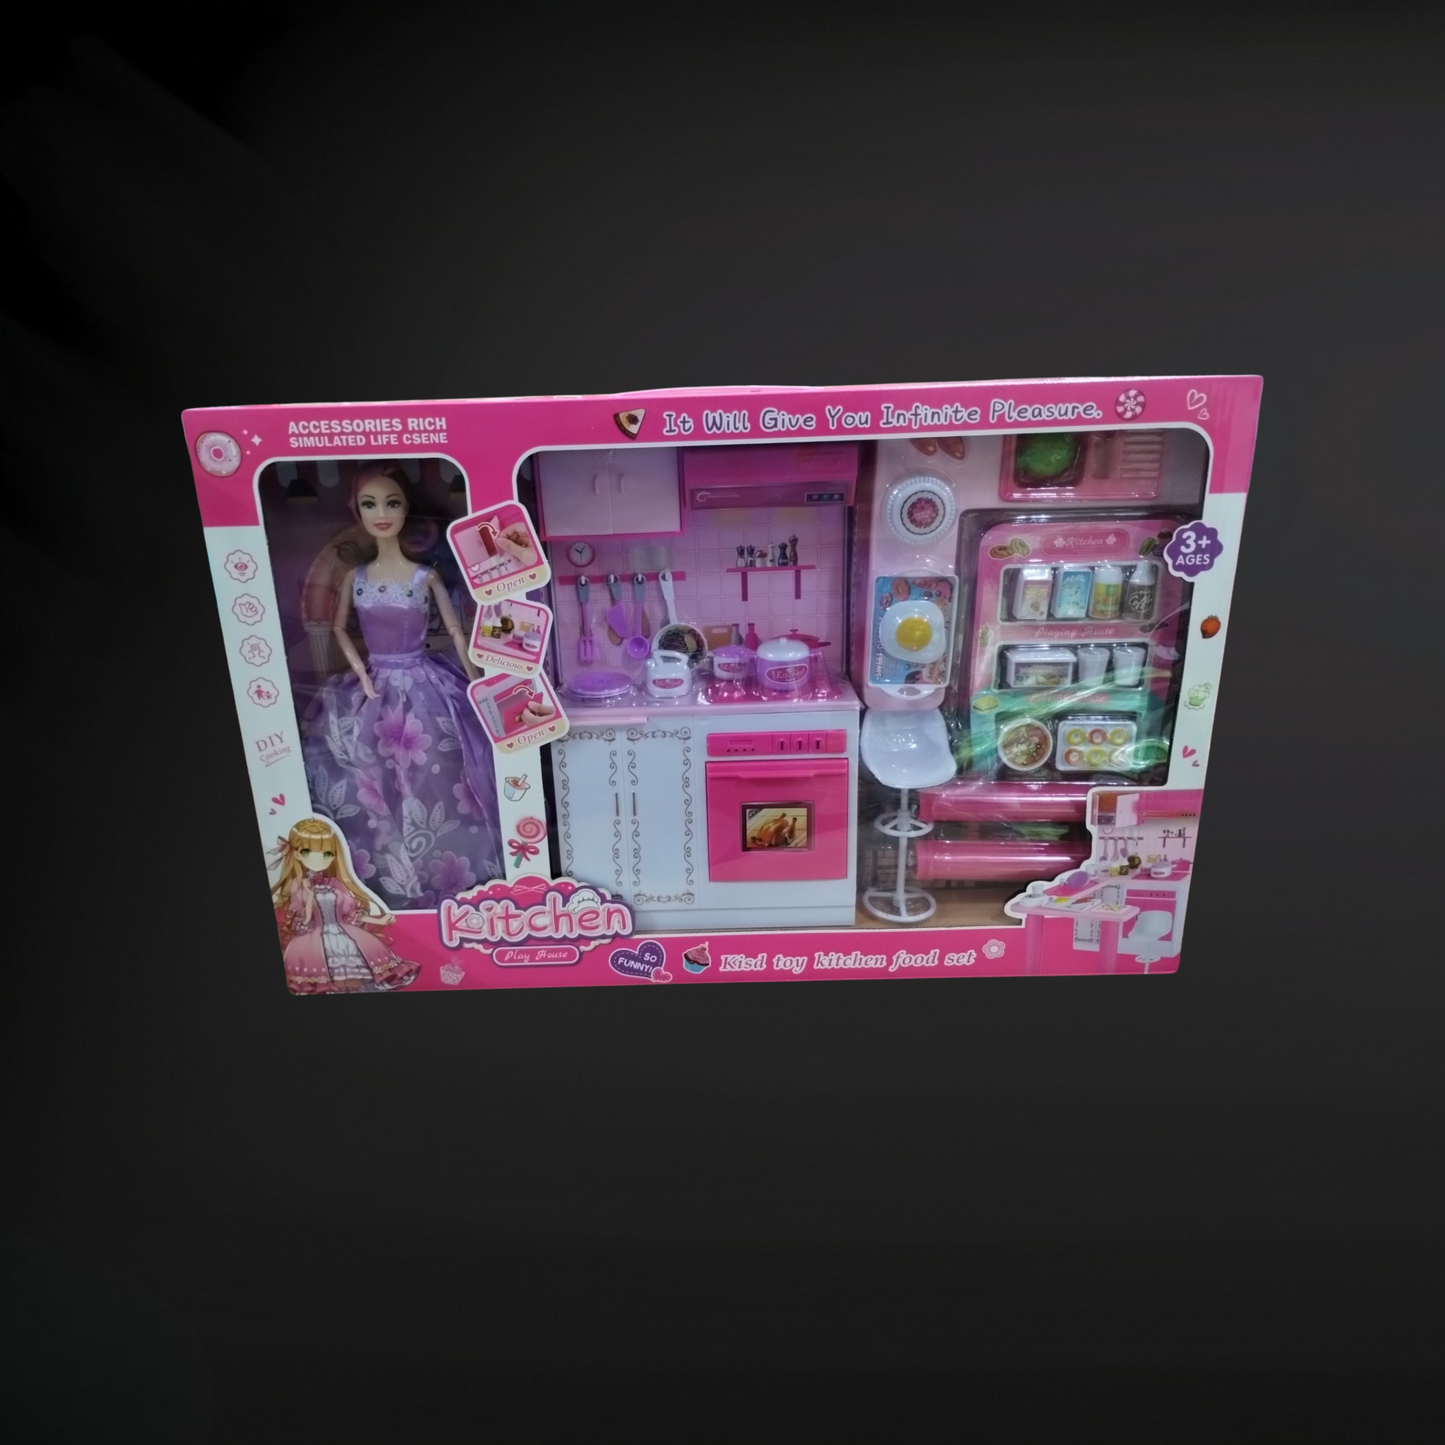 Kitchen Doll Playhouse Set with Doll and Accessories